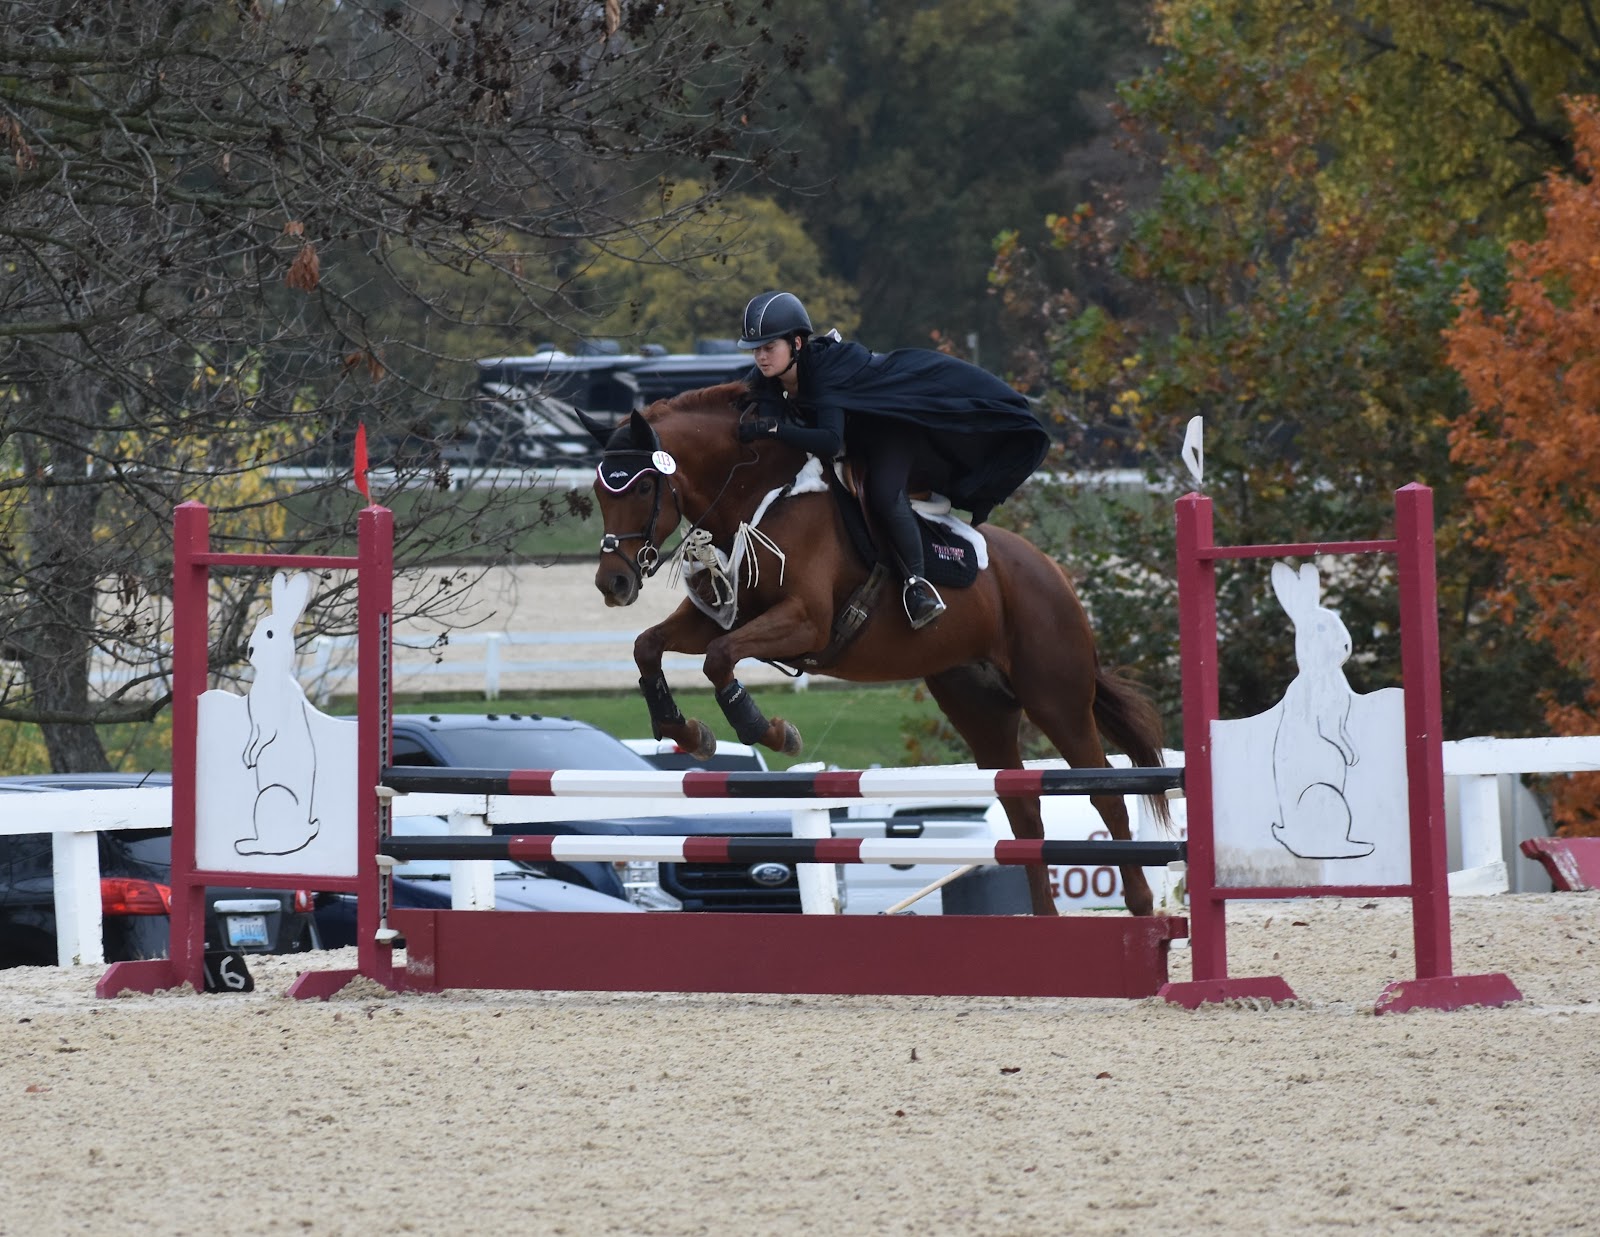 Transy Eventing celebrates Halloween at Octoberfest Horse Show